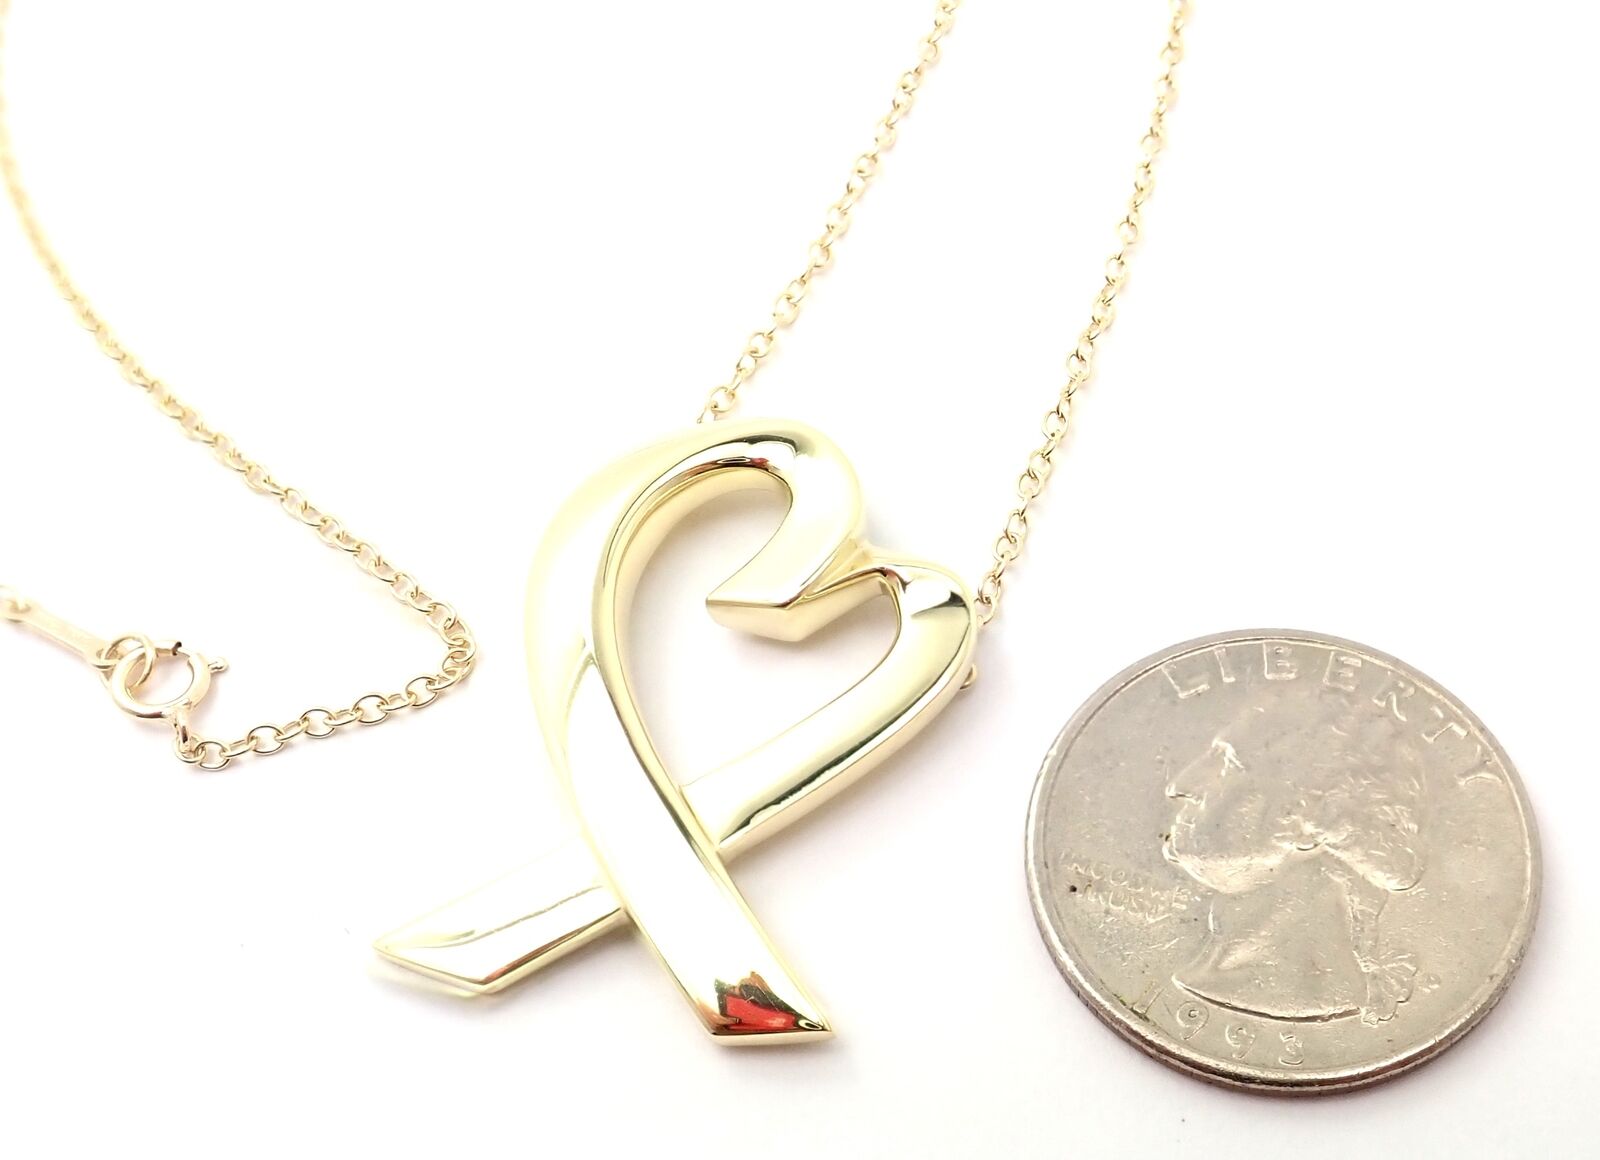 Tiffany & Co. Jewelry & Watches:Fine Jewelry:Necklaces & Pendants Authentic! Tiffany & Co Picasso 18k Yellow Gold Large Heart Pendant Necklace